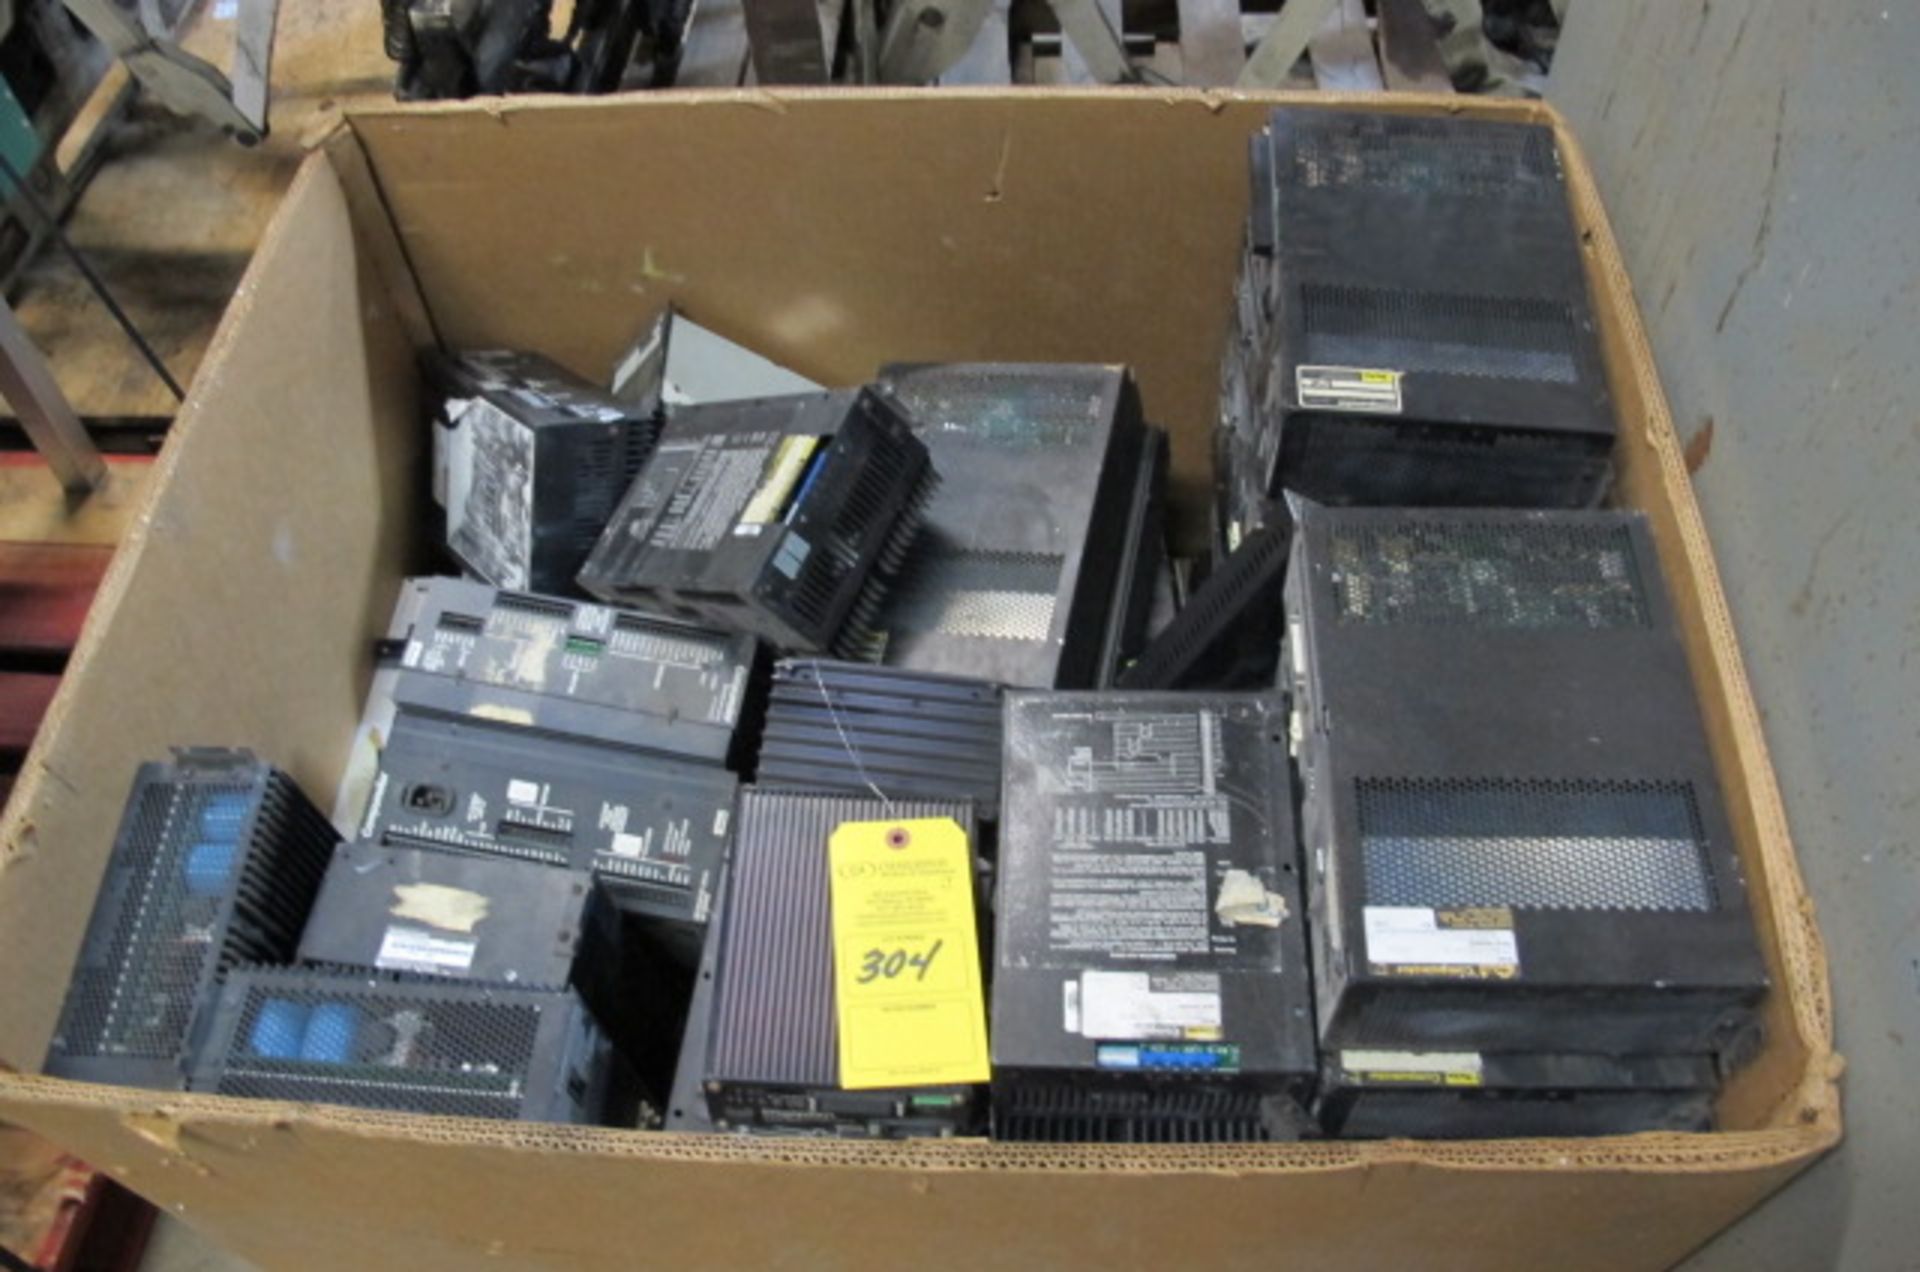 ASSORTED PARKER COMPUMOTOR MICROSTEP DRIVES; SX SERIES; LX SERIES; AX SERIES 7652 OH 120, Lyons,